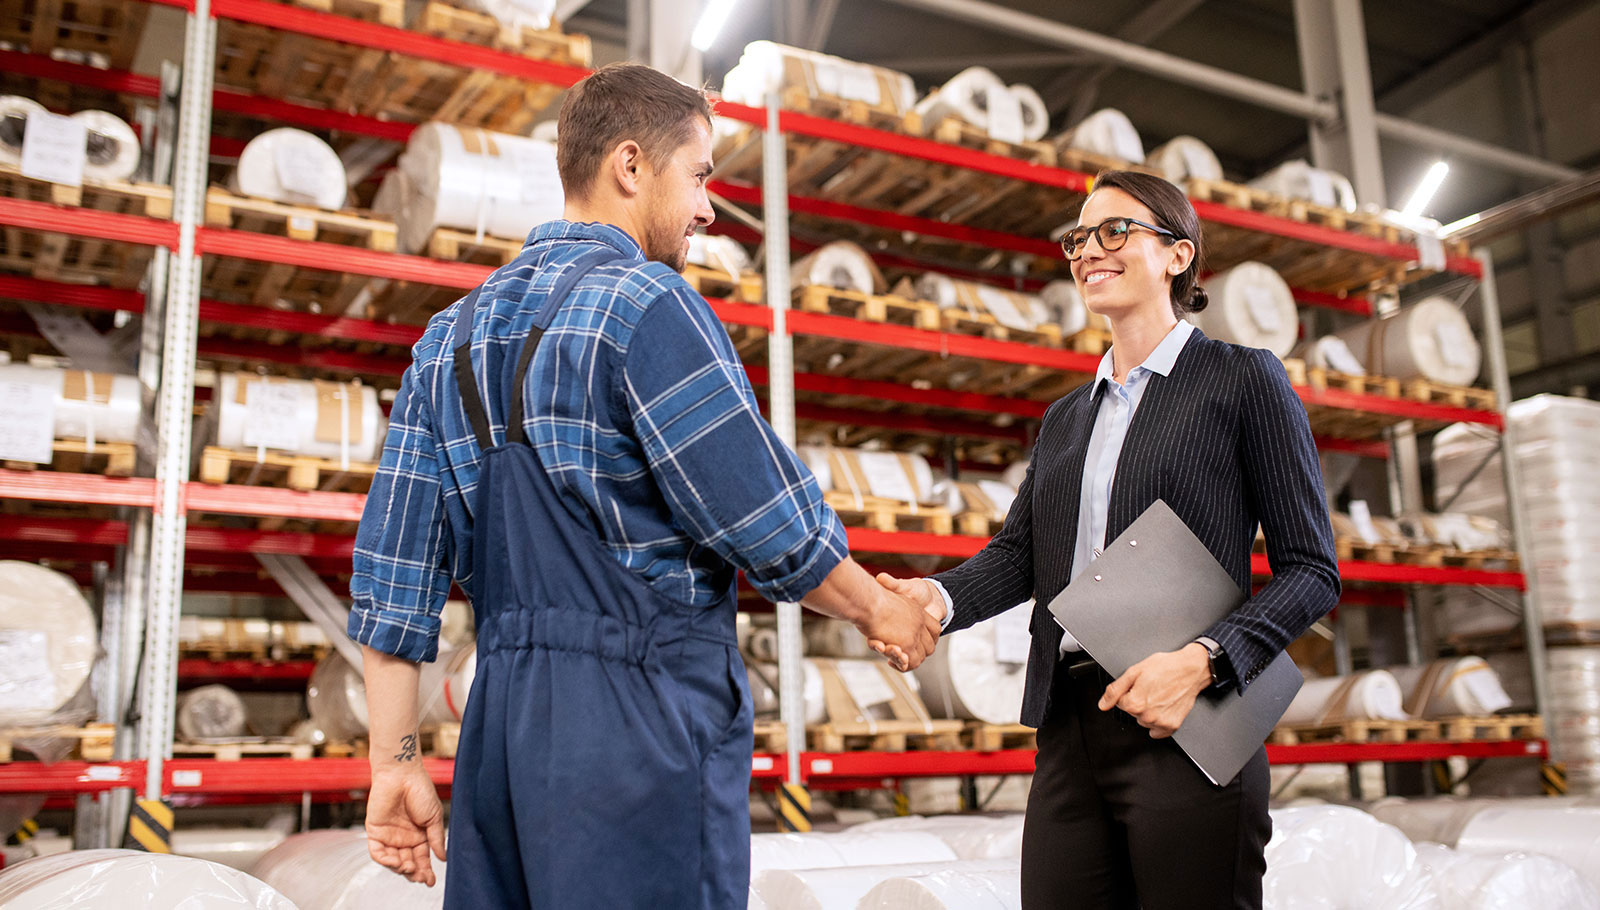 Business partners shaking hands in a warehouse.